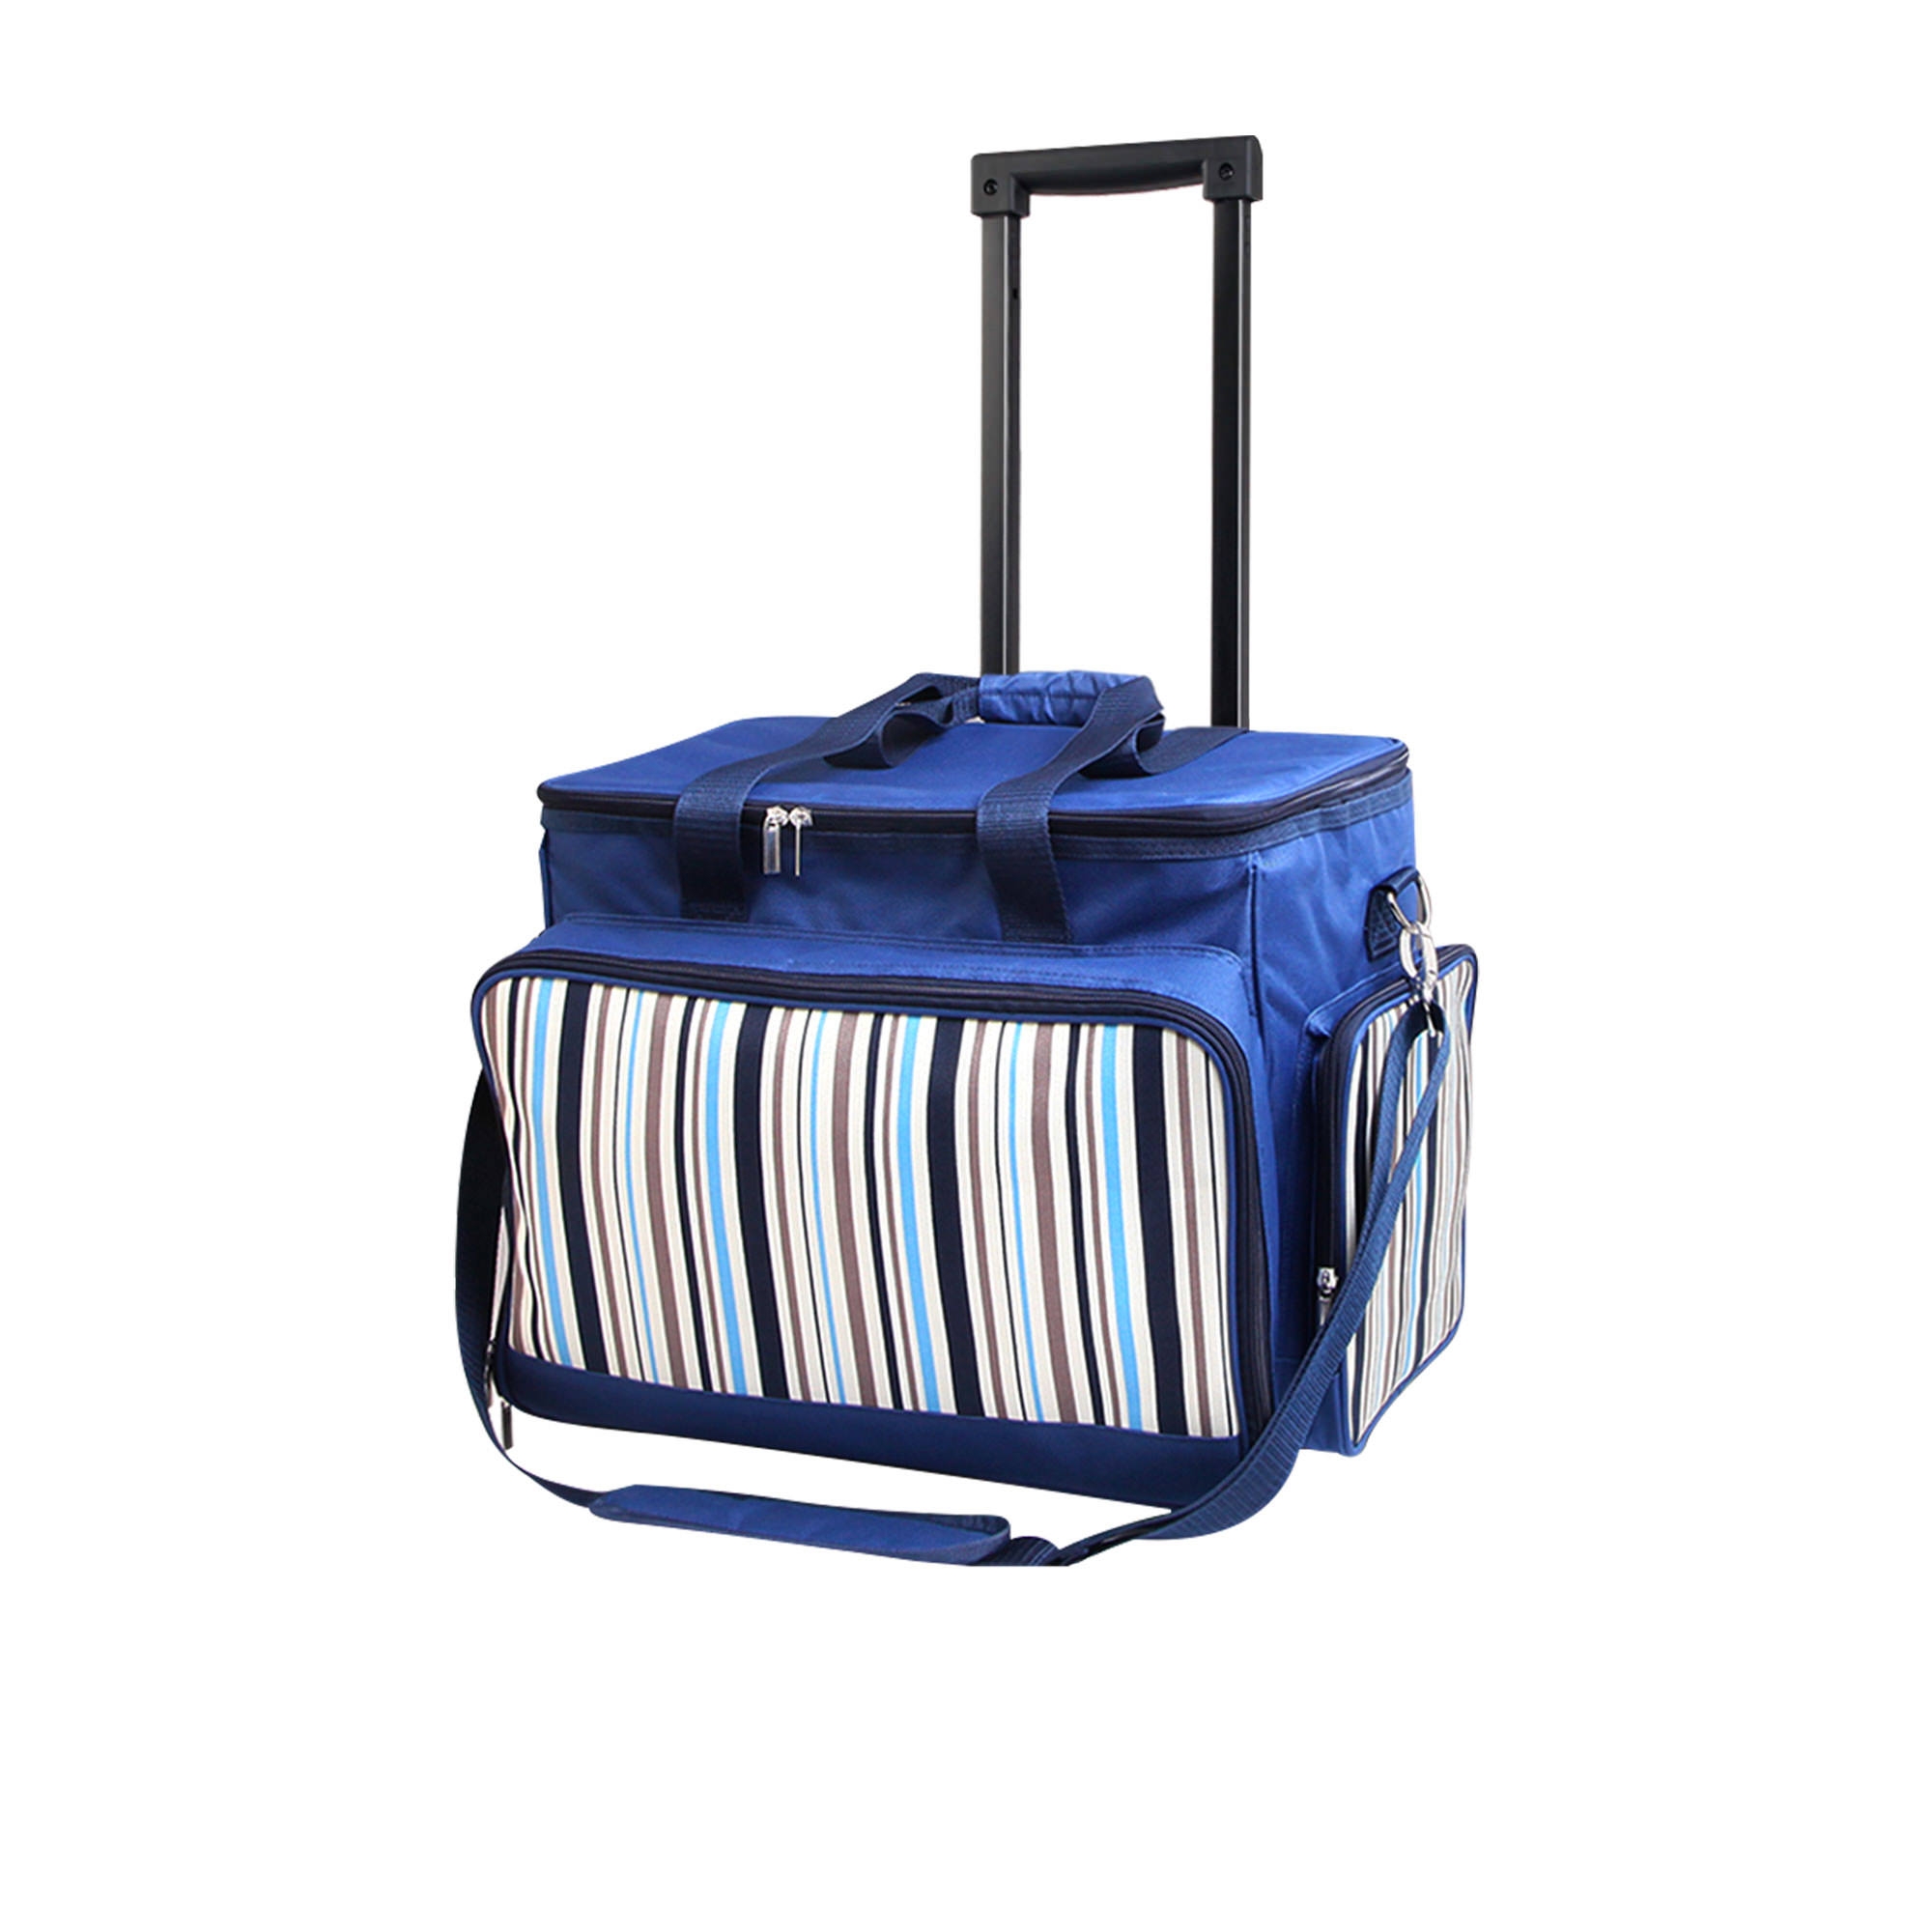 Alfresco 6 Person Insulated Picnic Bag Trolley Set Blue Image 1